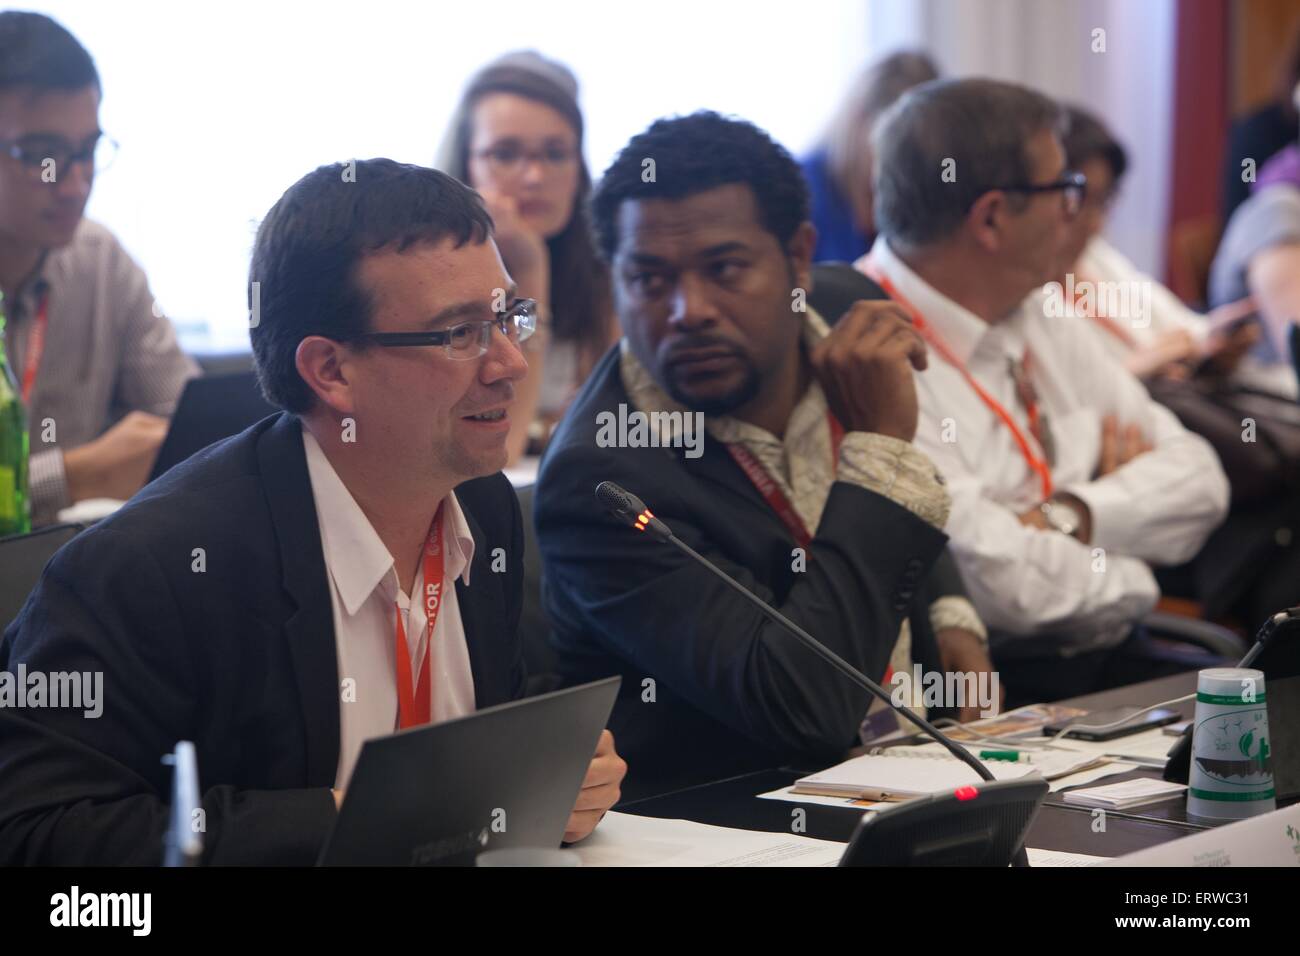 Paris, France. 8th June, 2015. Green Cross, World Ocean Day Symposium, Paris Climate 2015, Ocean Objective proposition from the Blue Economy Conference, Anthony Lecren Minister of environment of New Caledonia, Nicolas Imbert, Director Gren Cross France. Credit:  Ania Freindorf/Alamy Live News Stock Photo